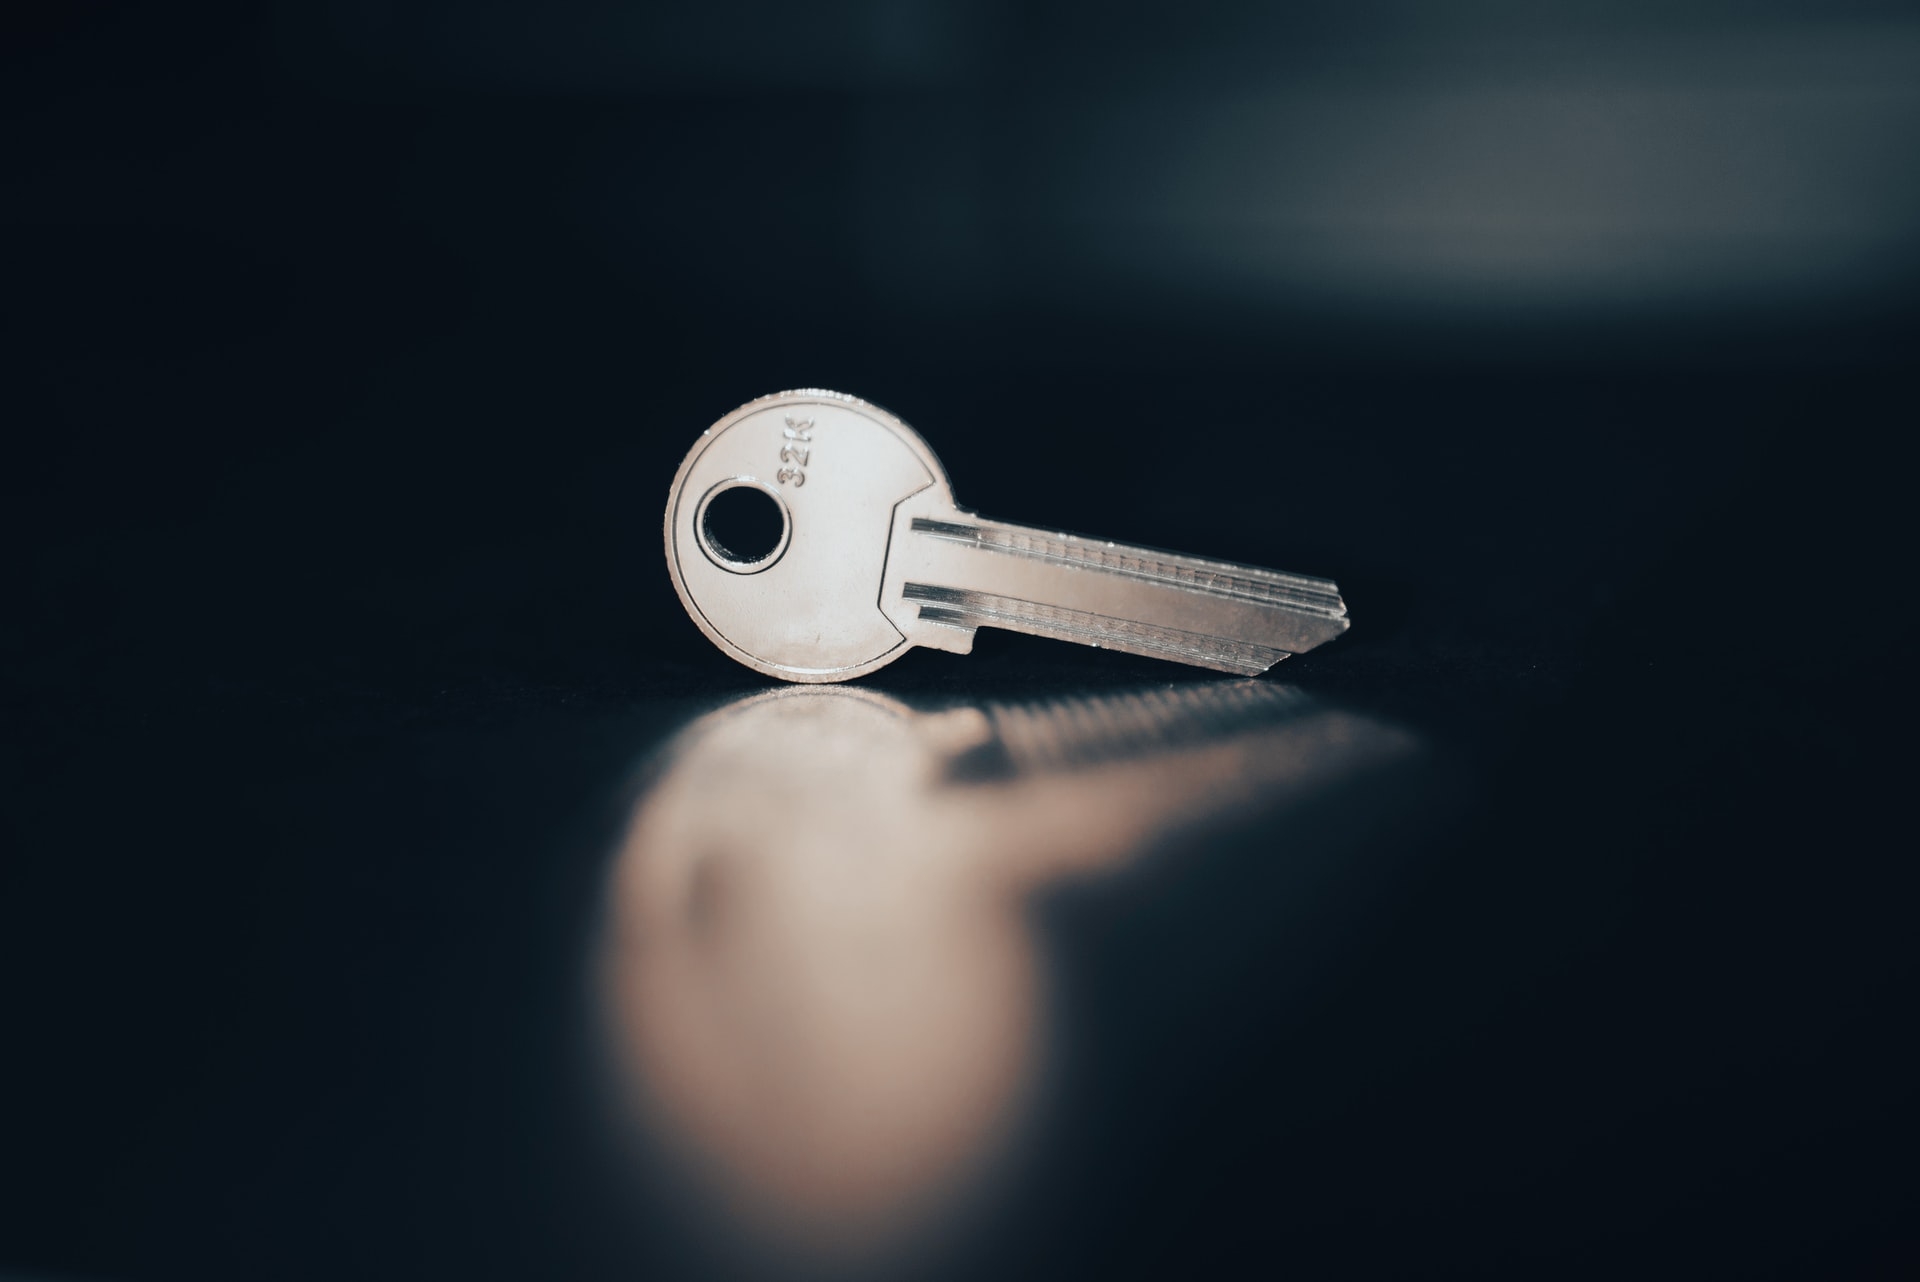 What do you protect better: your passwords or your house keys?